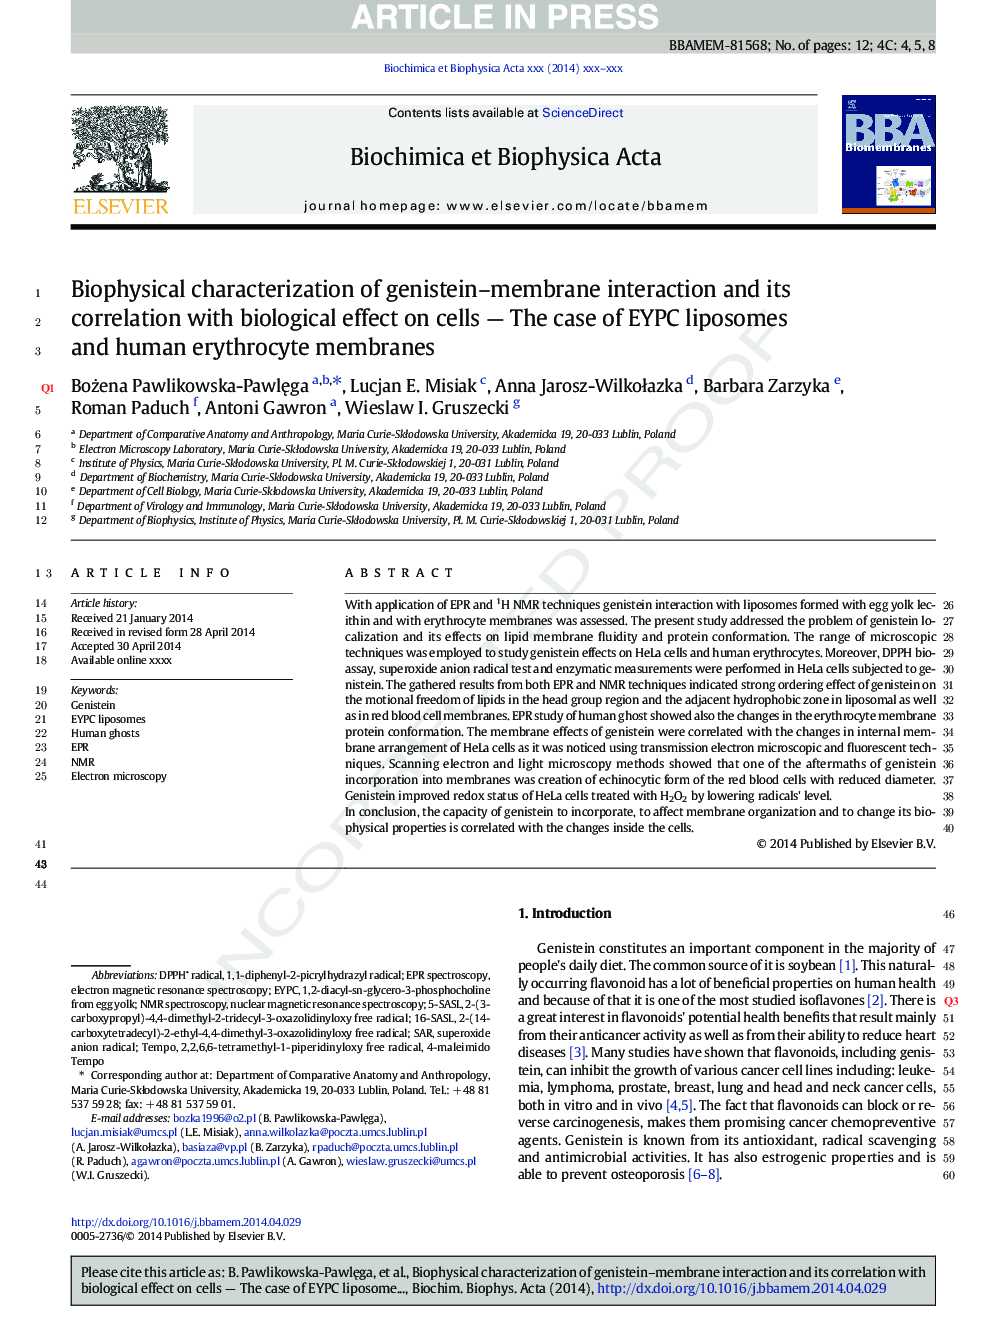 Biophysical characterization of genistein-membrane interaction and its correlation with biological effect on cells - The case of EYPC liposomes and human erythrocyte membranes